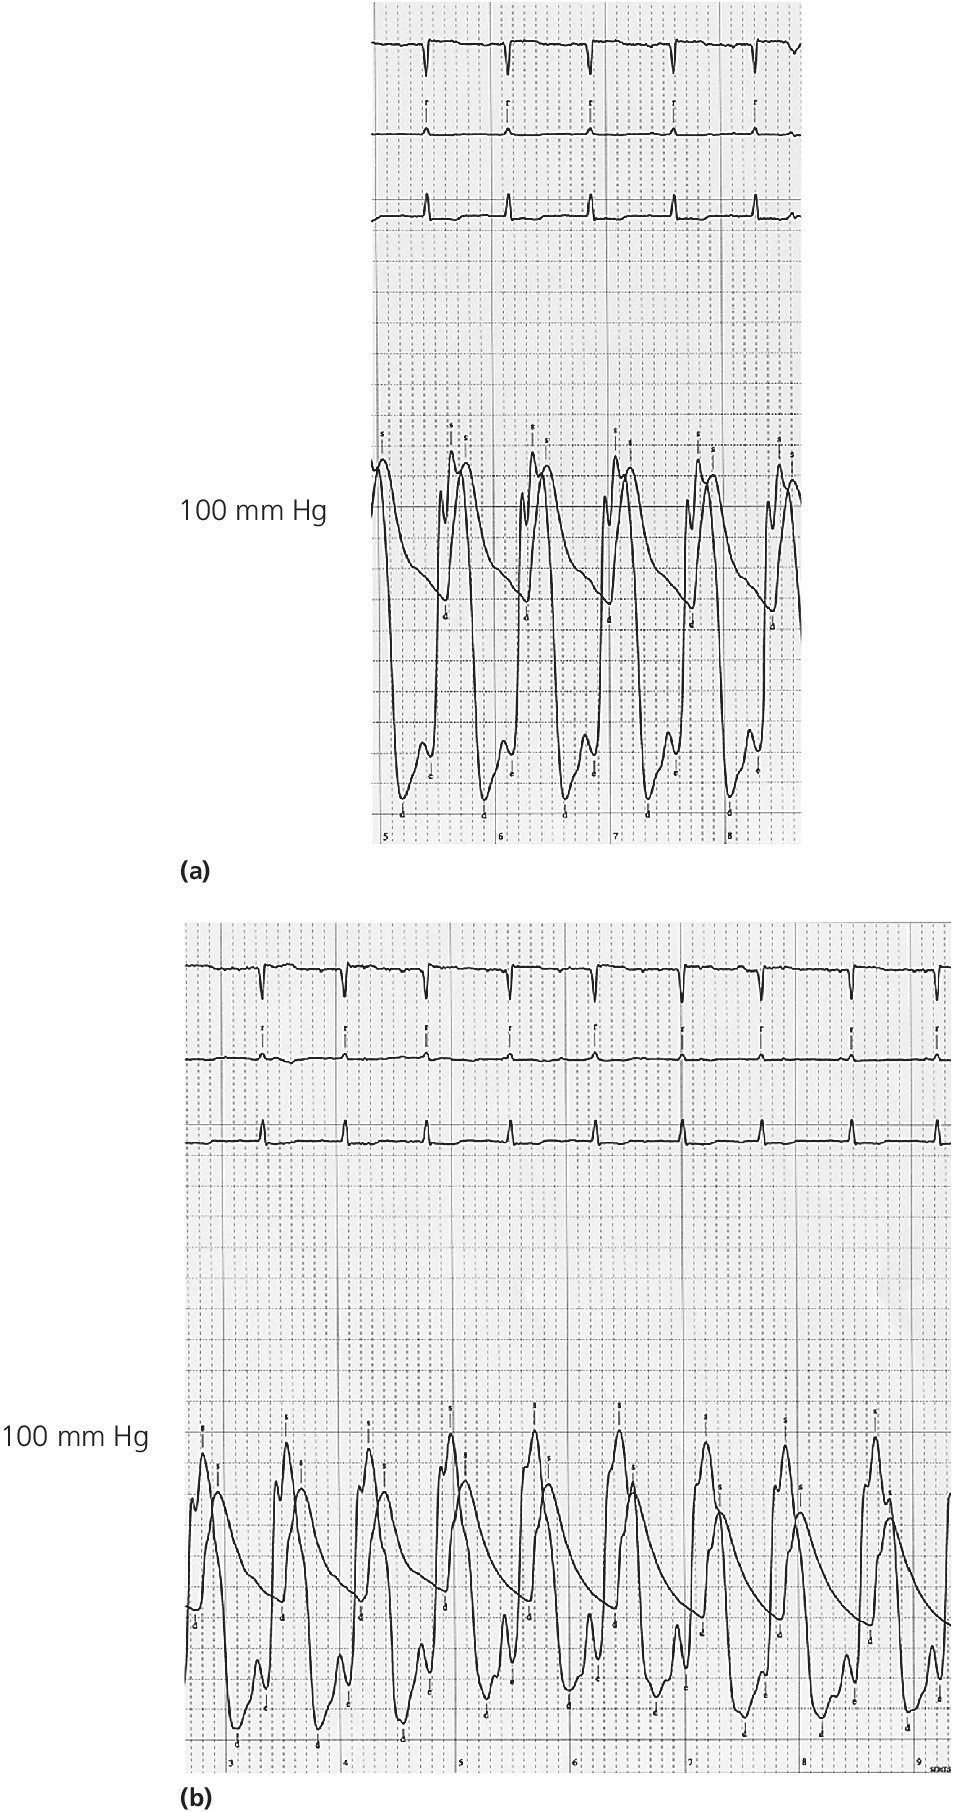 2 Electrocardiograms for LV tracings in a patient with HOCM displaying pressures obtained at baseline with elevated LVEDP (top) and obtained after inhalation of amyl nitrate with increased of LVEDP (bottom).